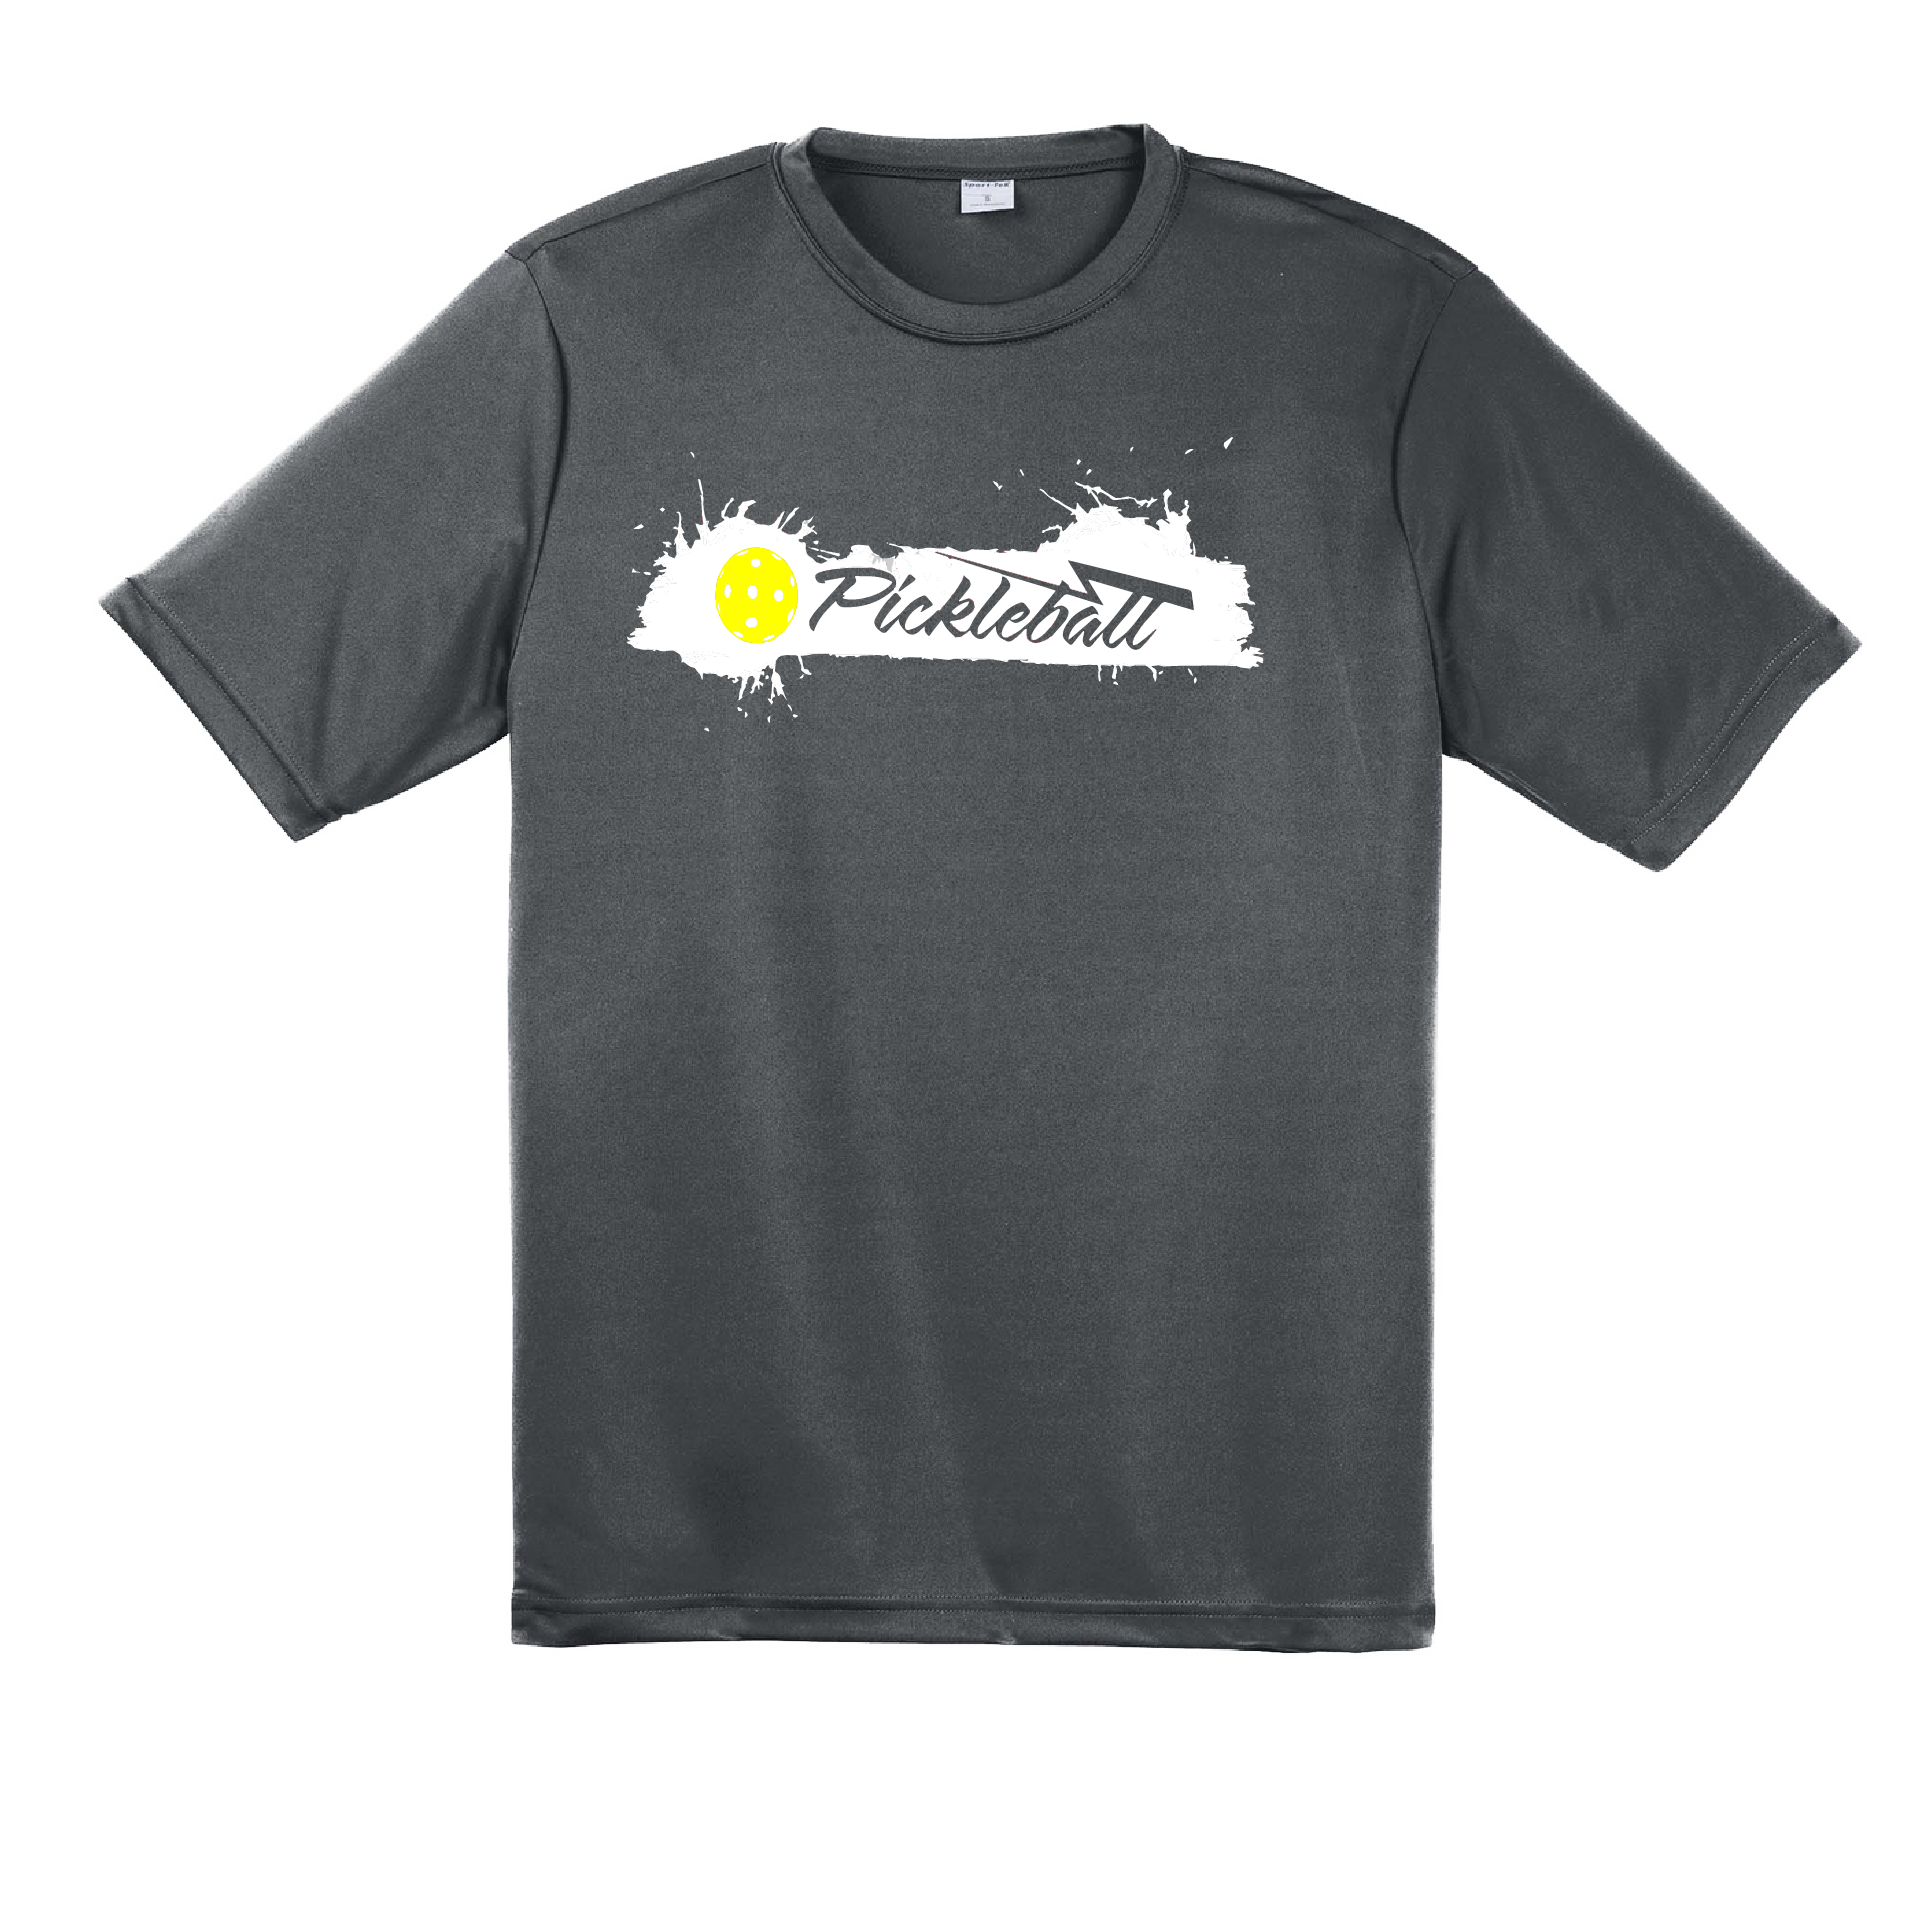 Pickleball Design: Extreme  Men's Style: Short Sleeved   Shirts are lightweight, roomy and highly breathable. These moisture-wicking shirts are designed for athletic performance. They feature PosiCharge technology to lock in color and prevent logos from fading. Removable tag and set-in sleeves for comfort.